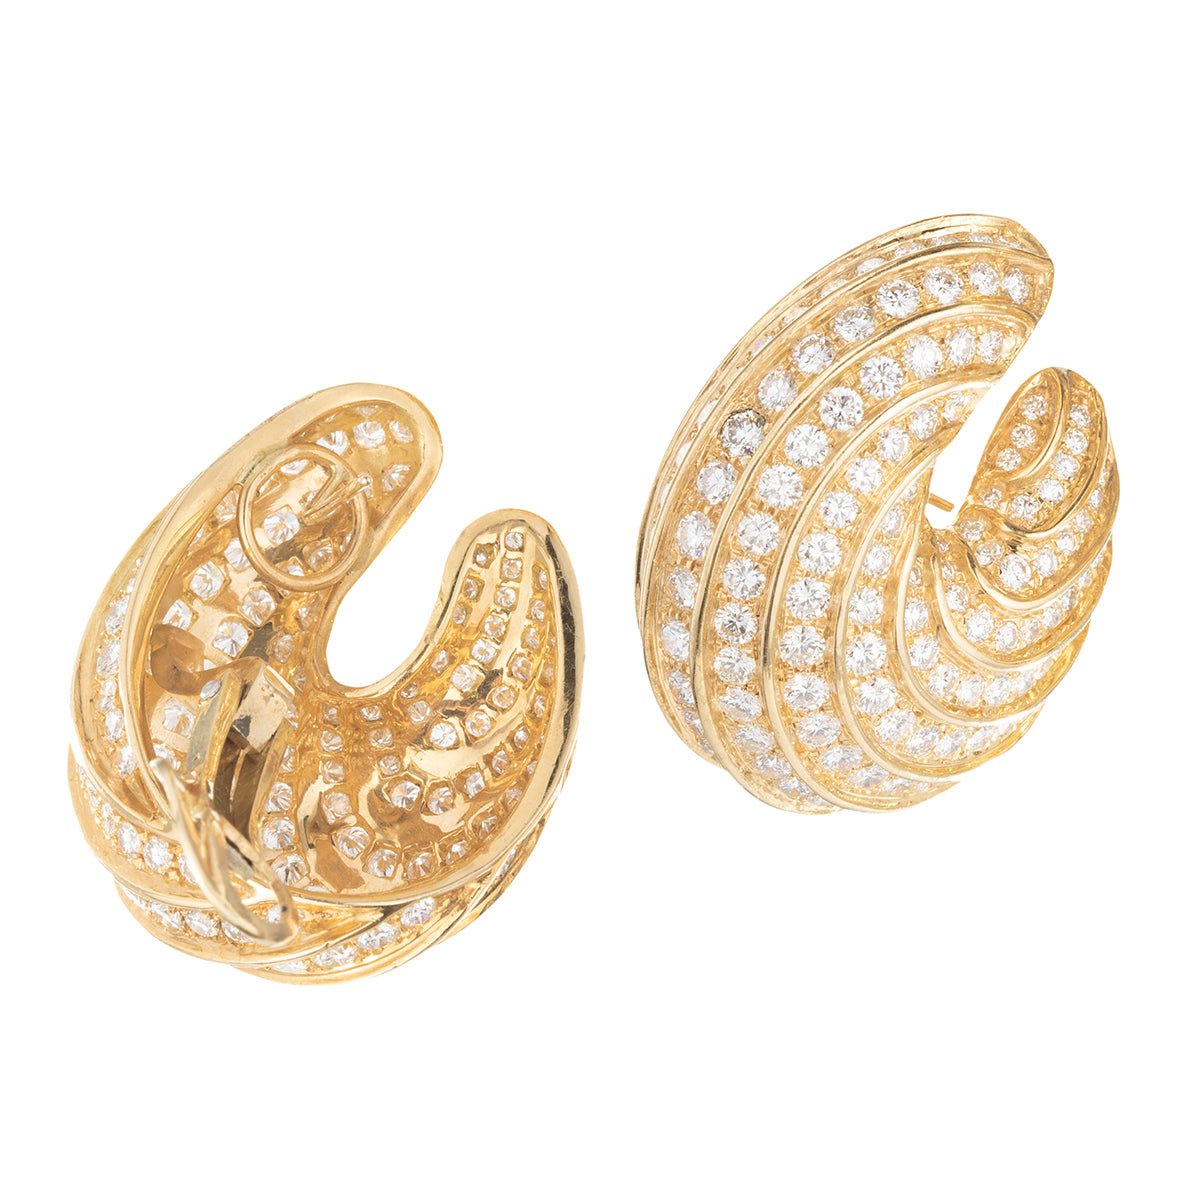 Estate Collection - 18k Yellow Gold Diamond Crescent Earrings